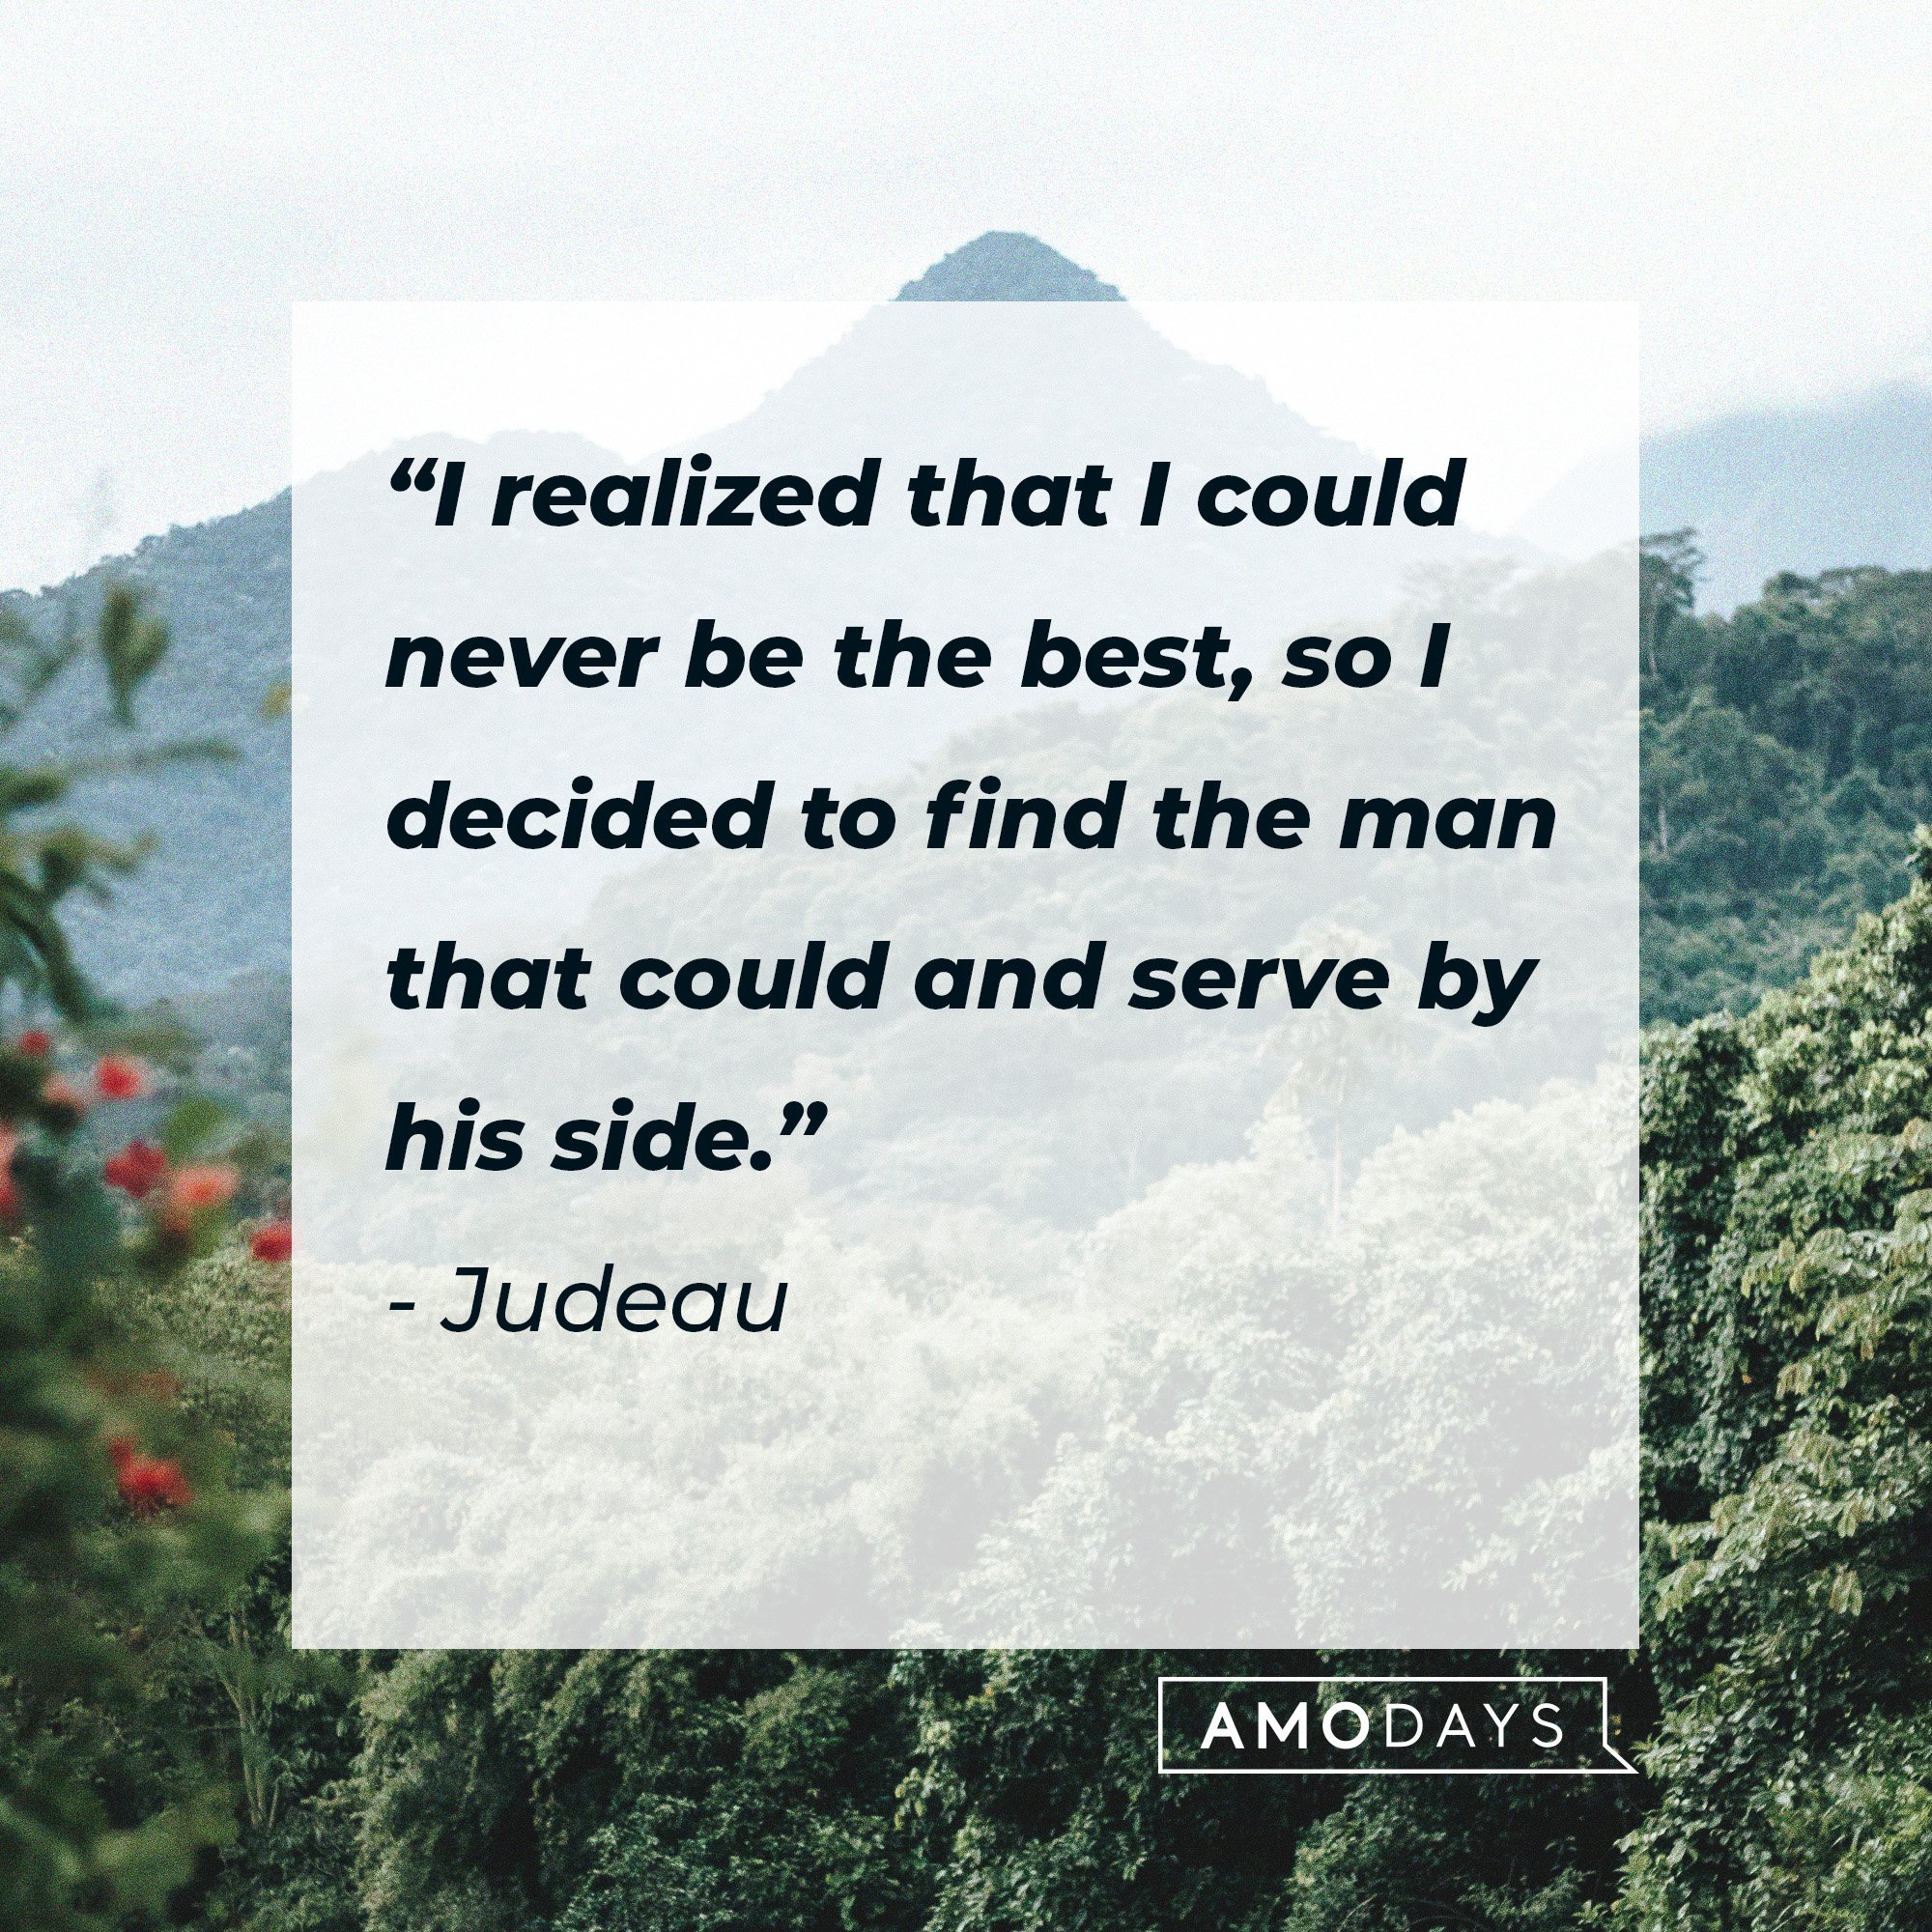  Judeau's quote: “I realized that I could never be the best, so I decided to find the man that could and serve by his side.” | Image: AmoDays